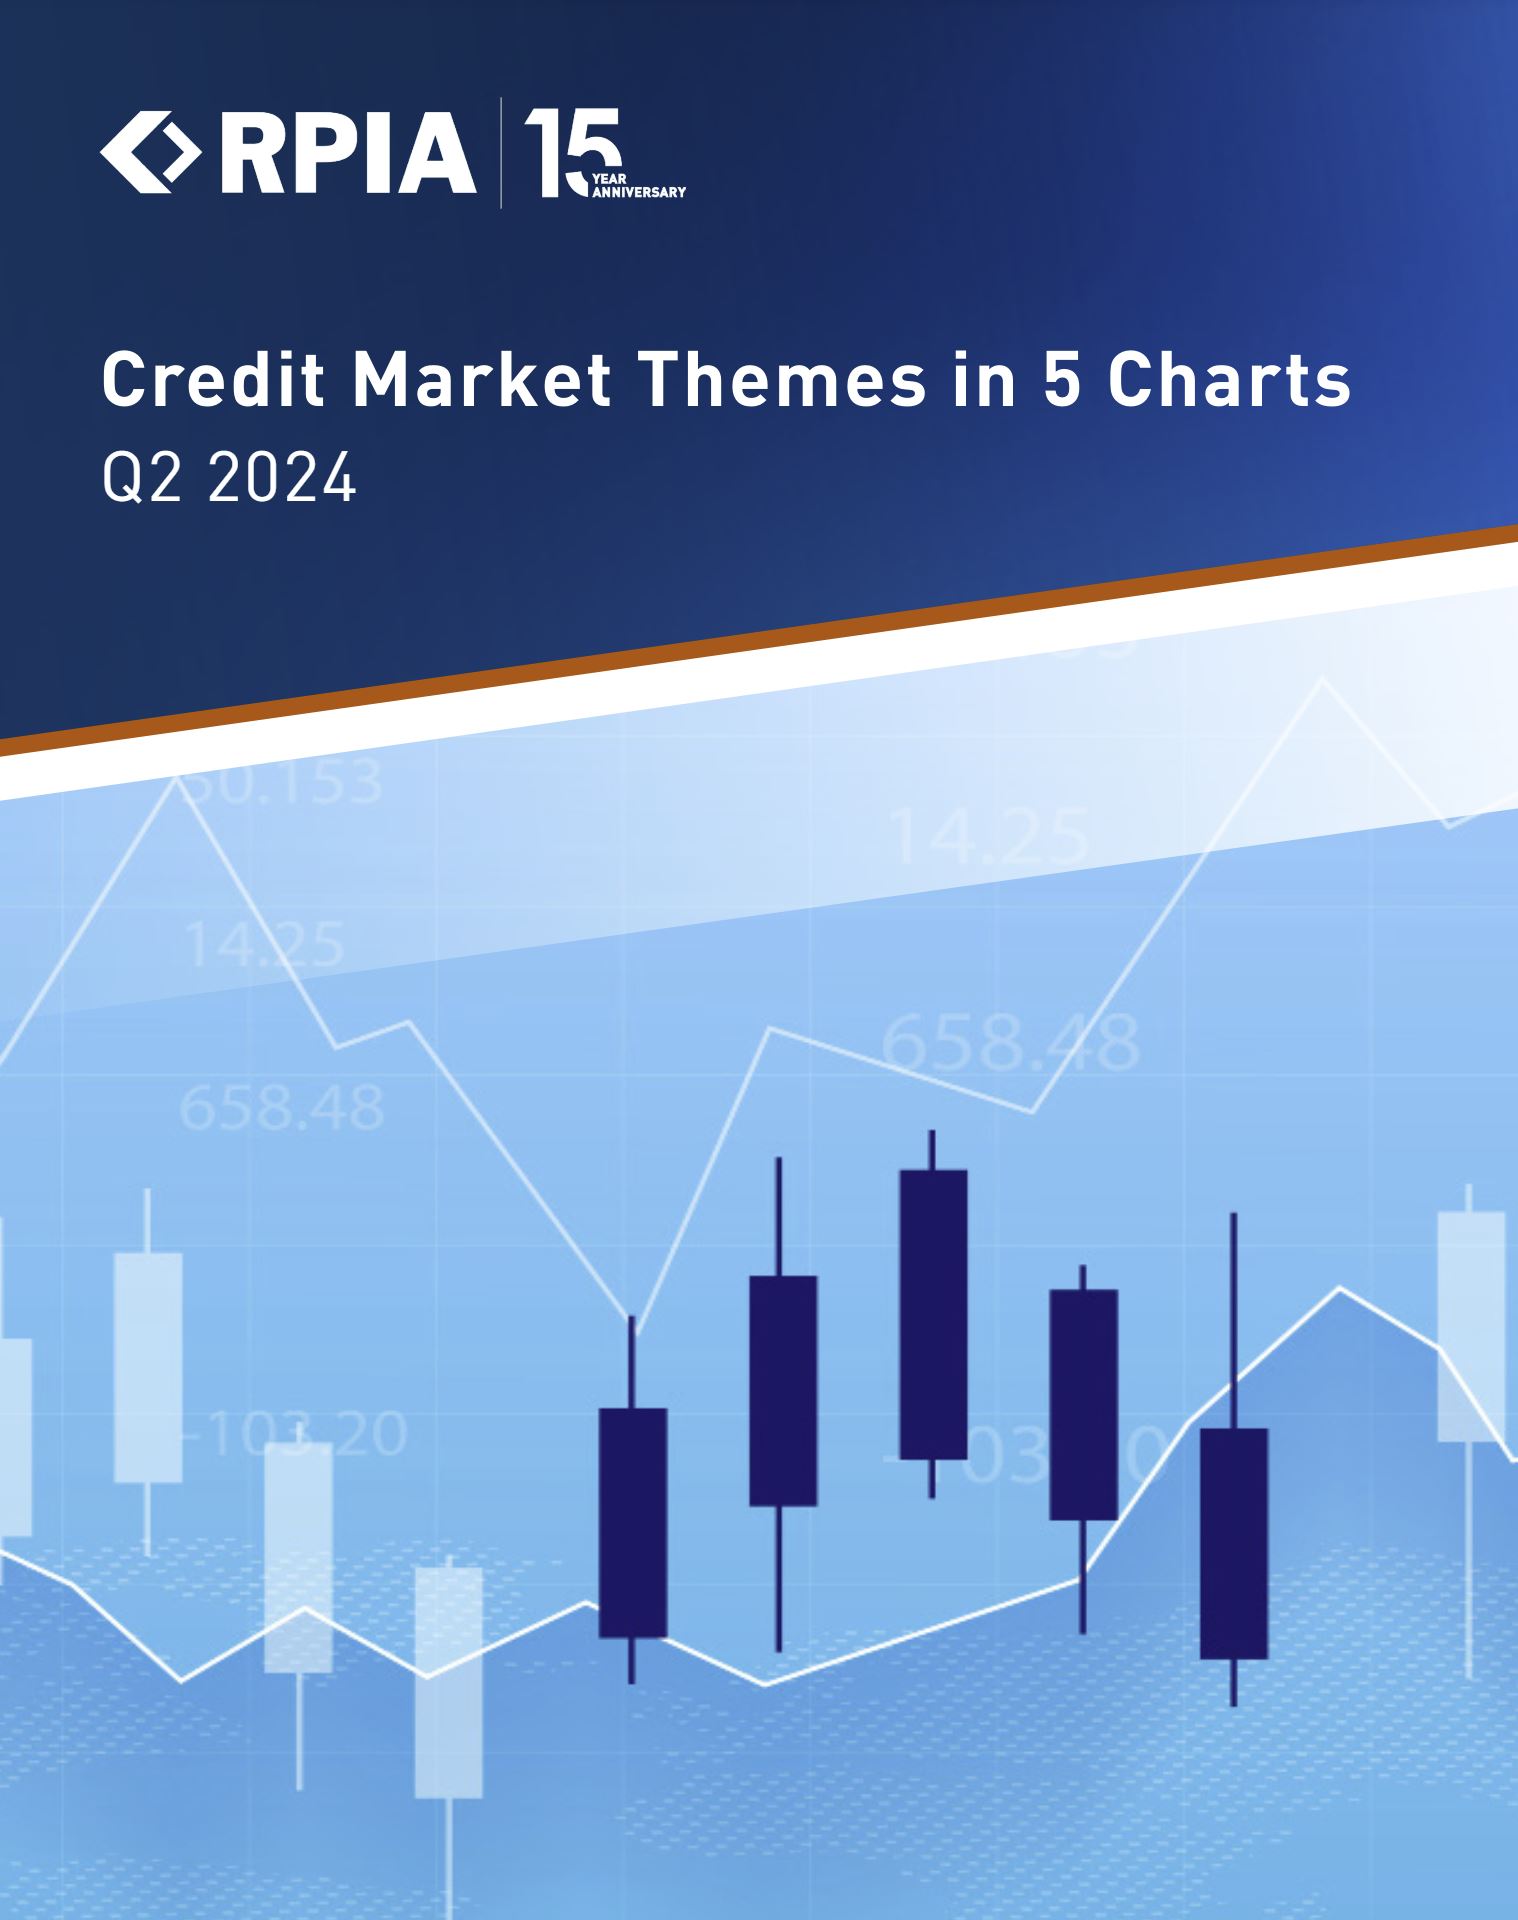 Credit Market Themes in 5 Charts